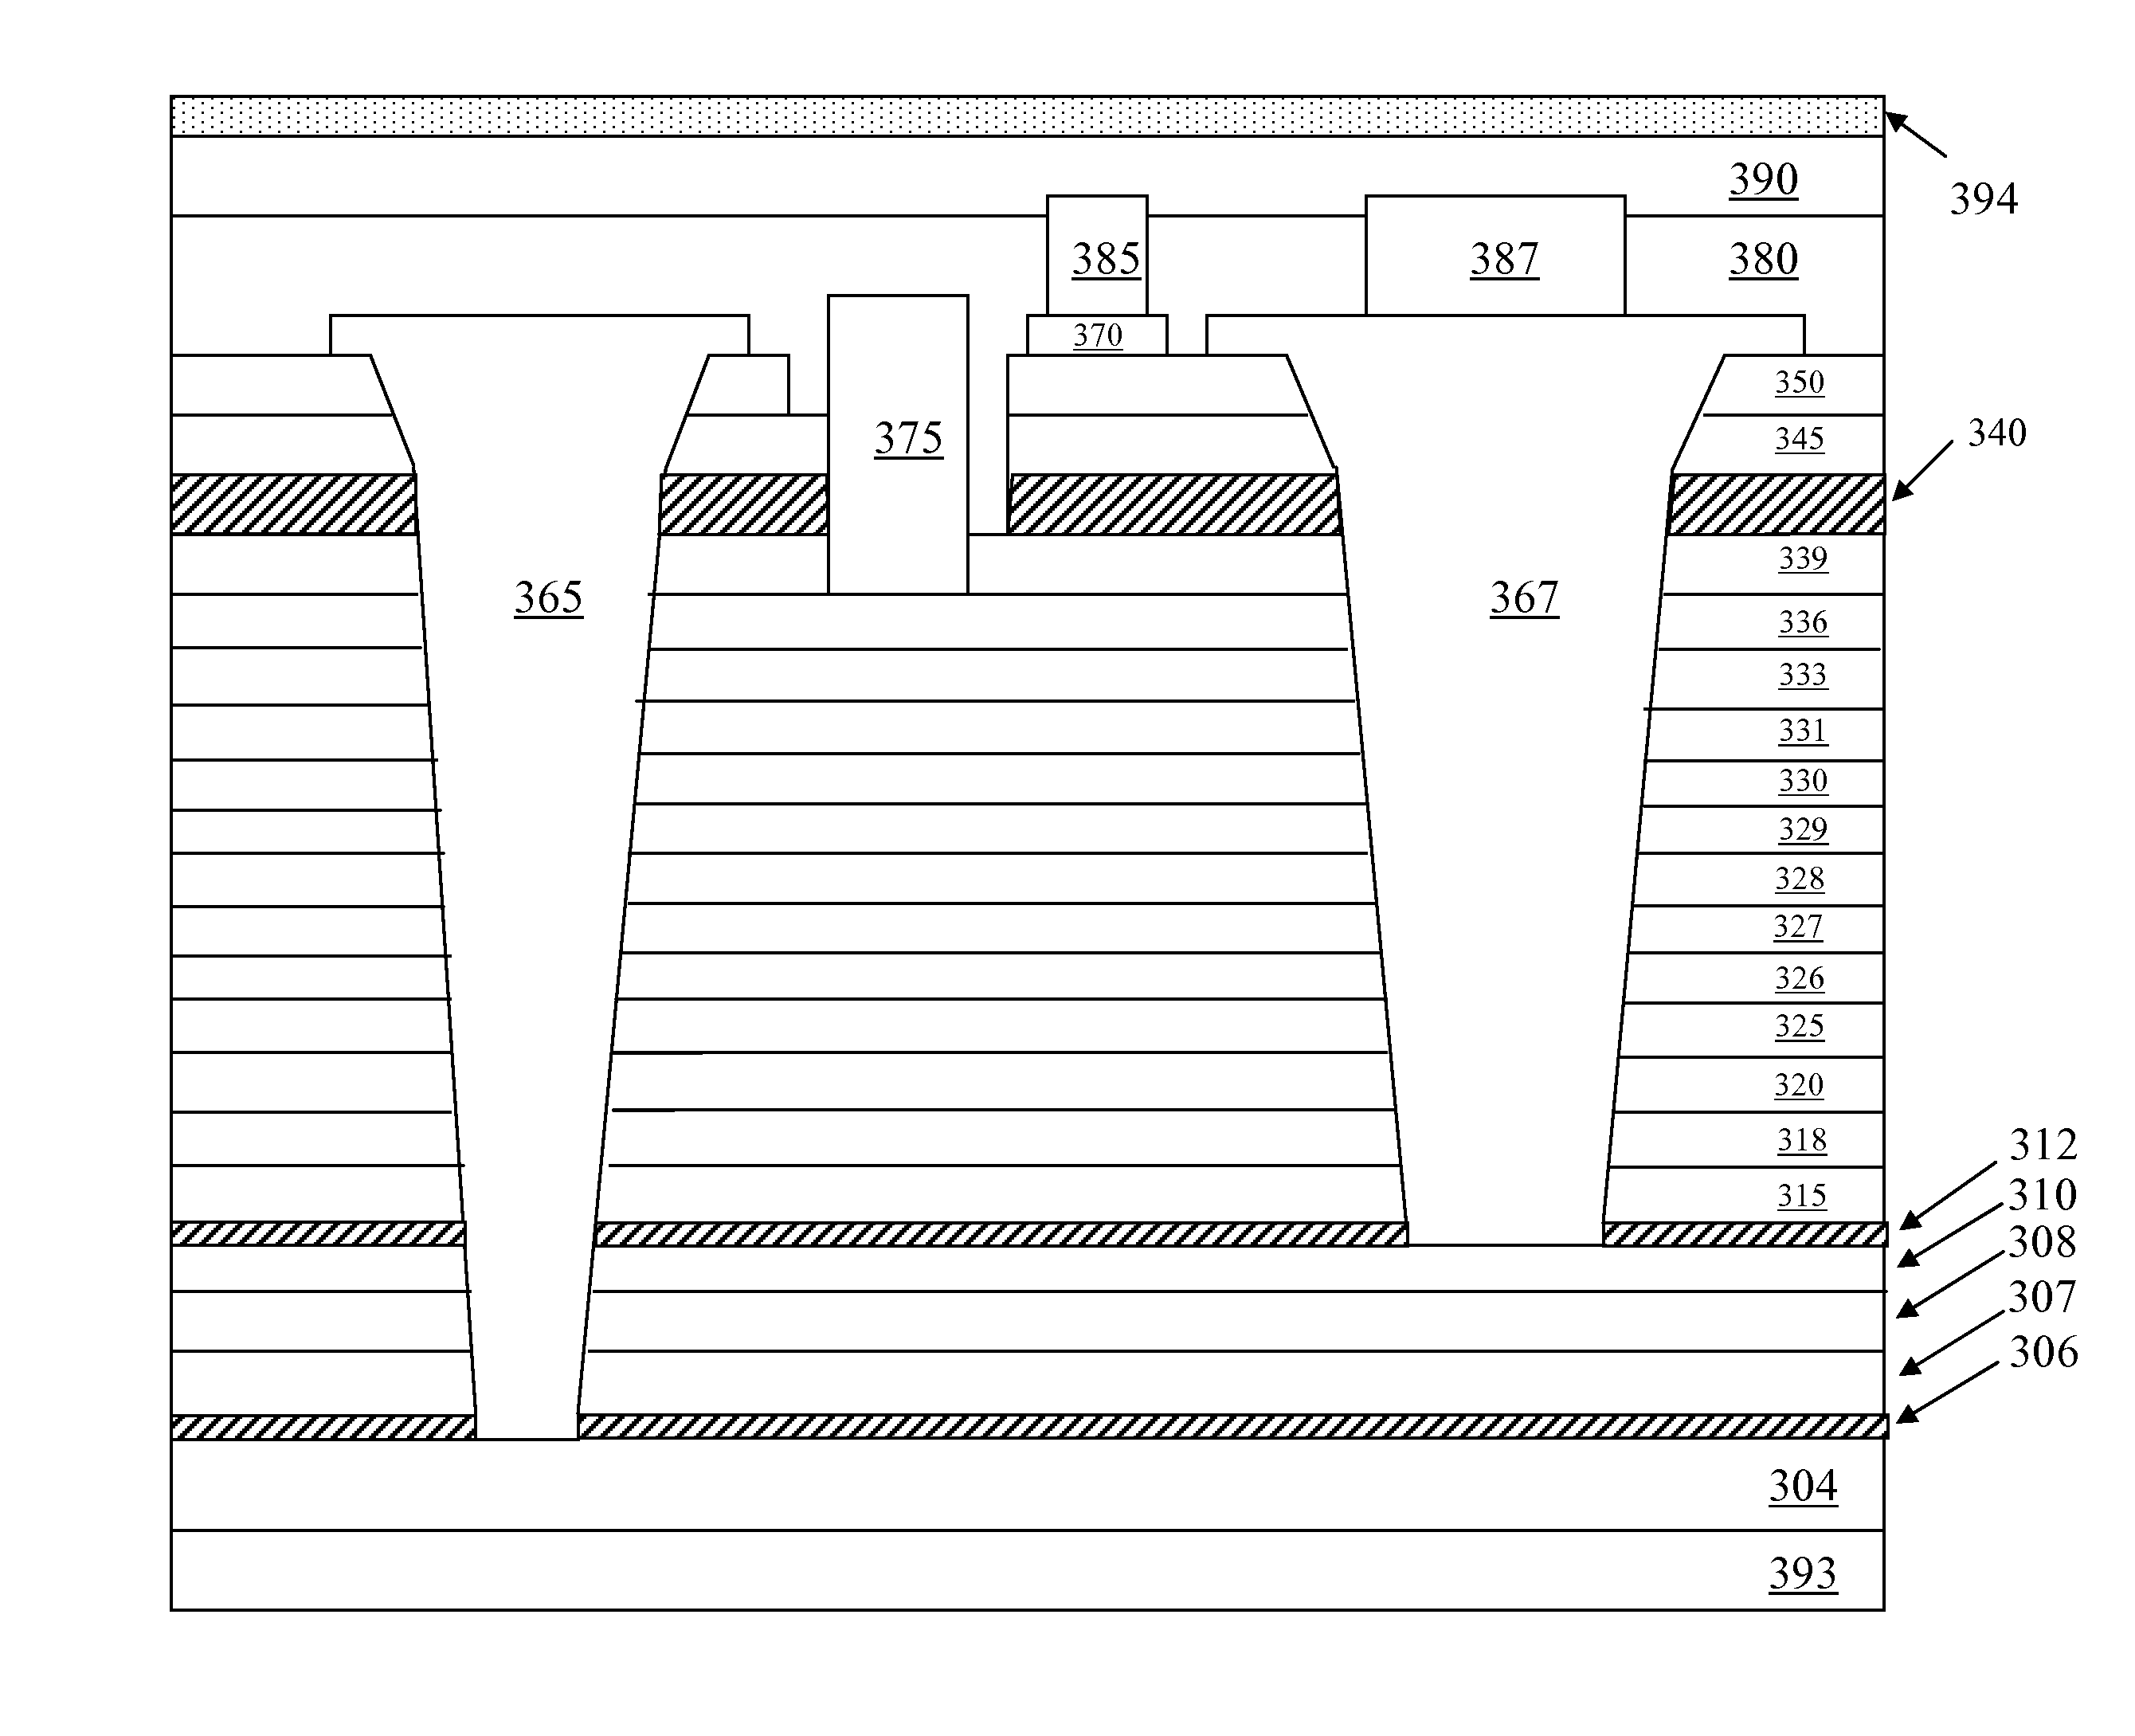 Semiconductor device including a lateral field-effect transistor and Schottky diode